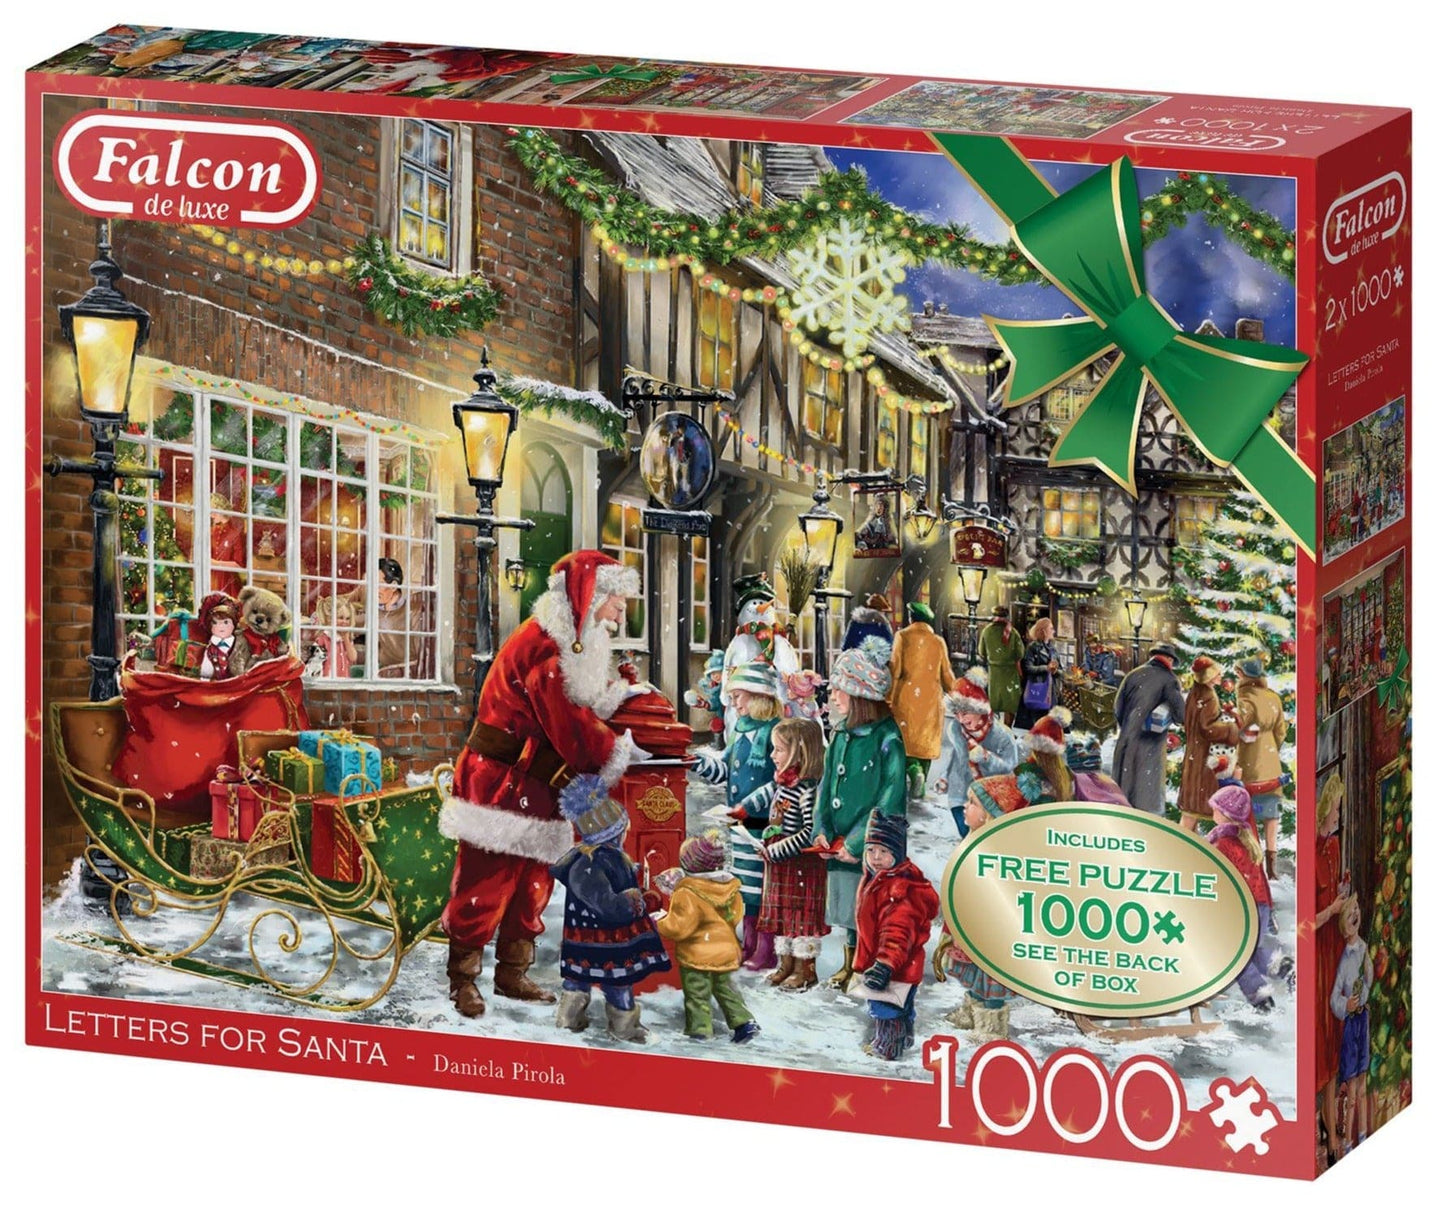 Letters for Santa 2 x 1000 Piece Jigsaw Puzzle box